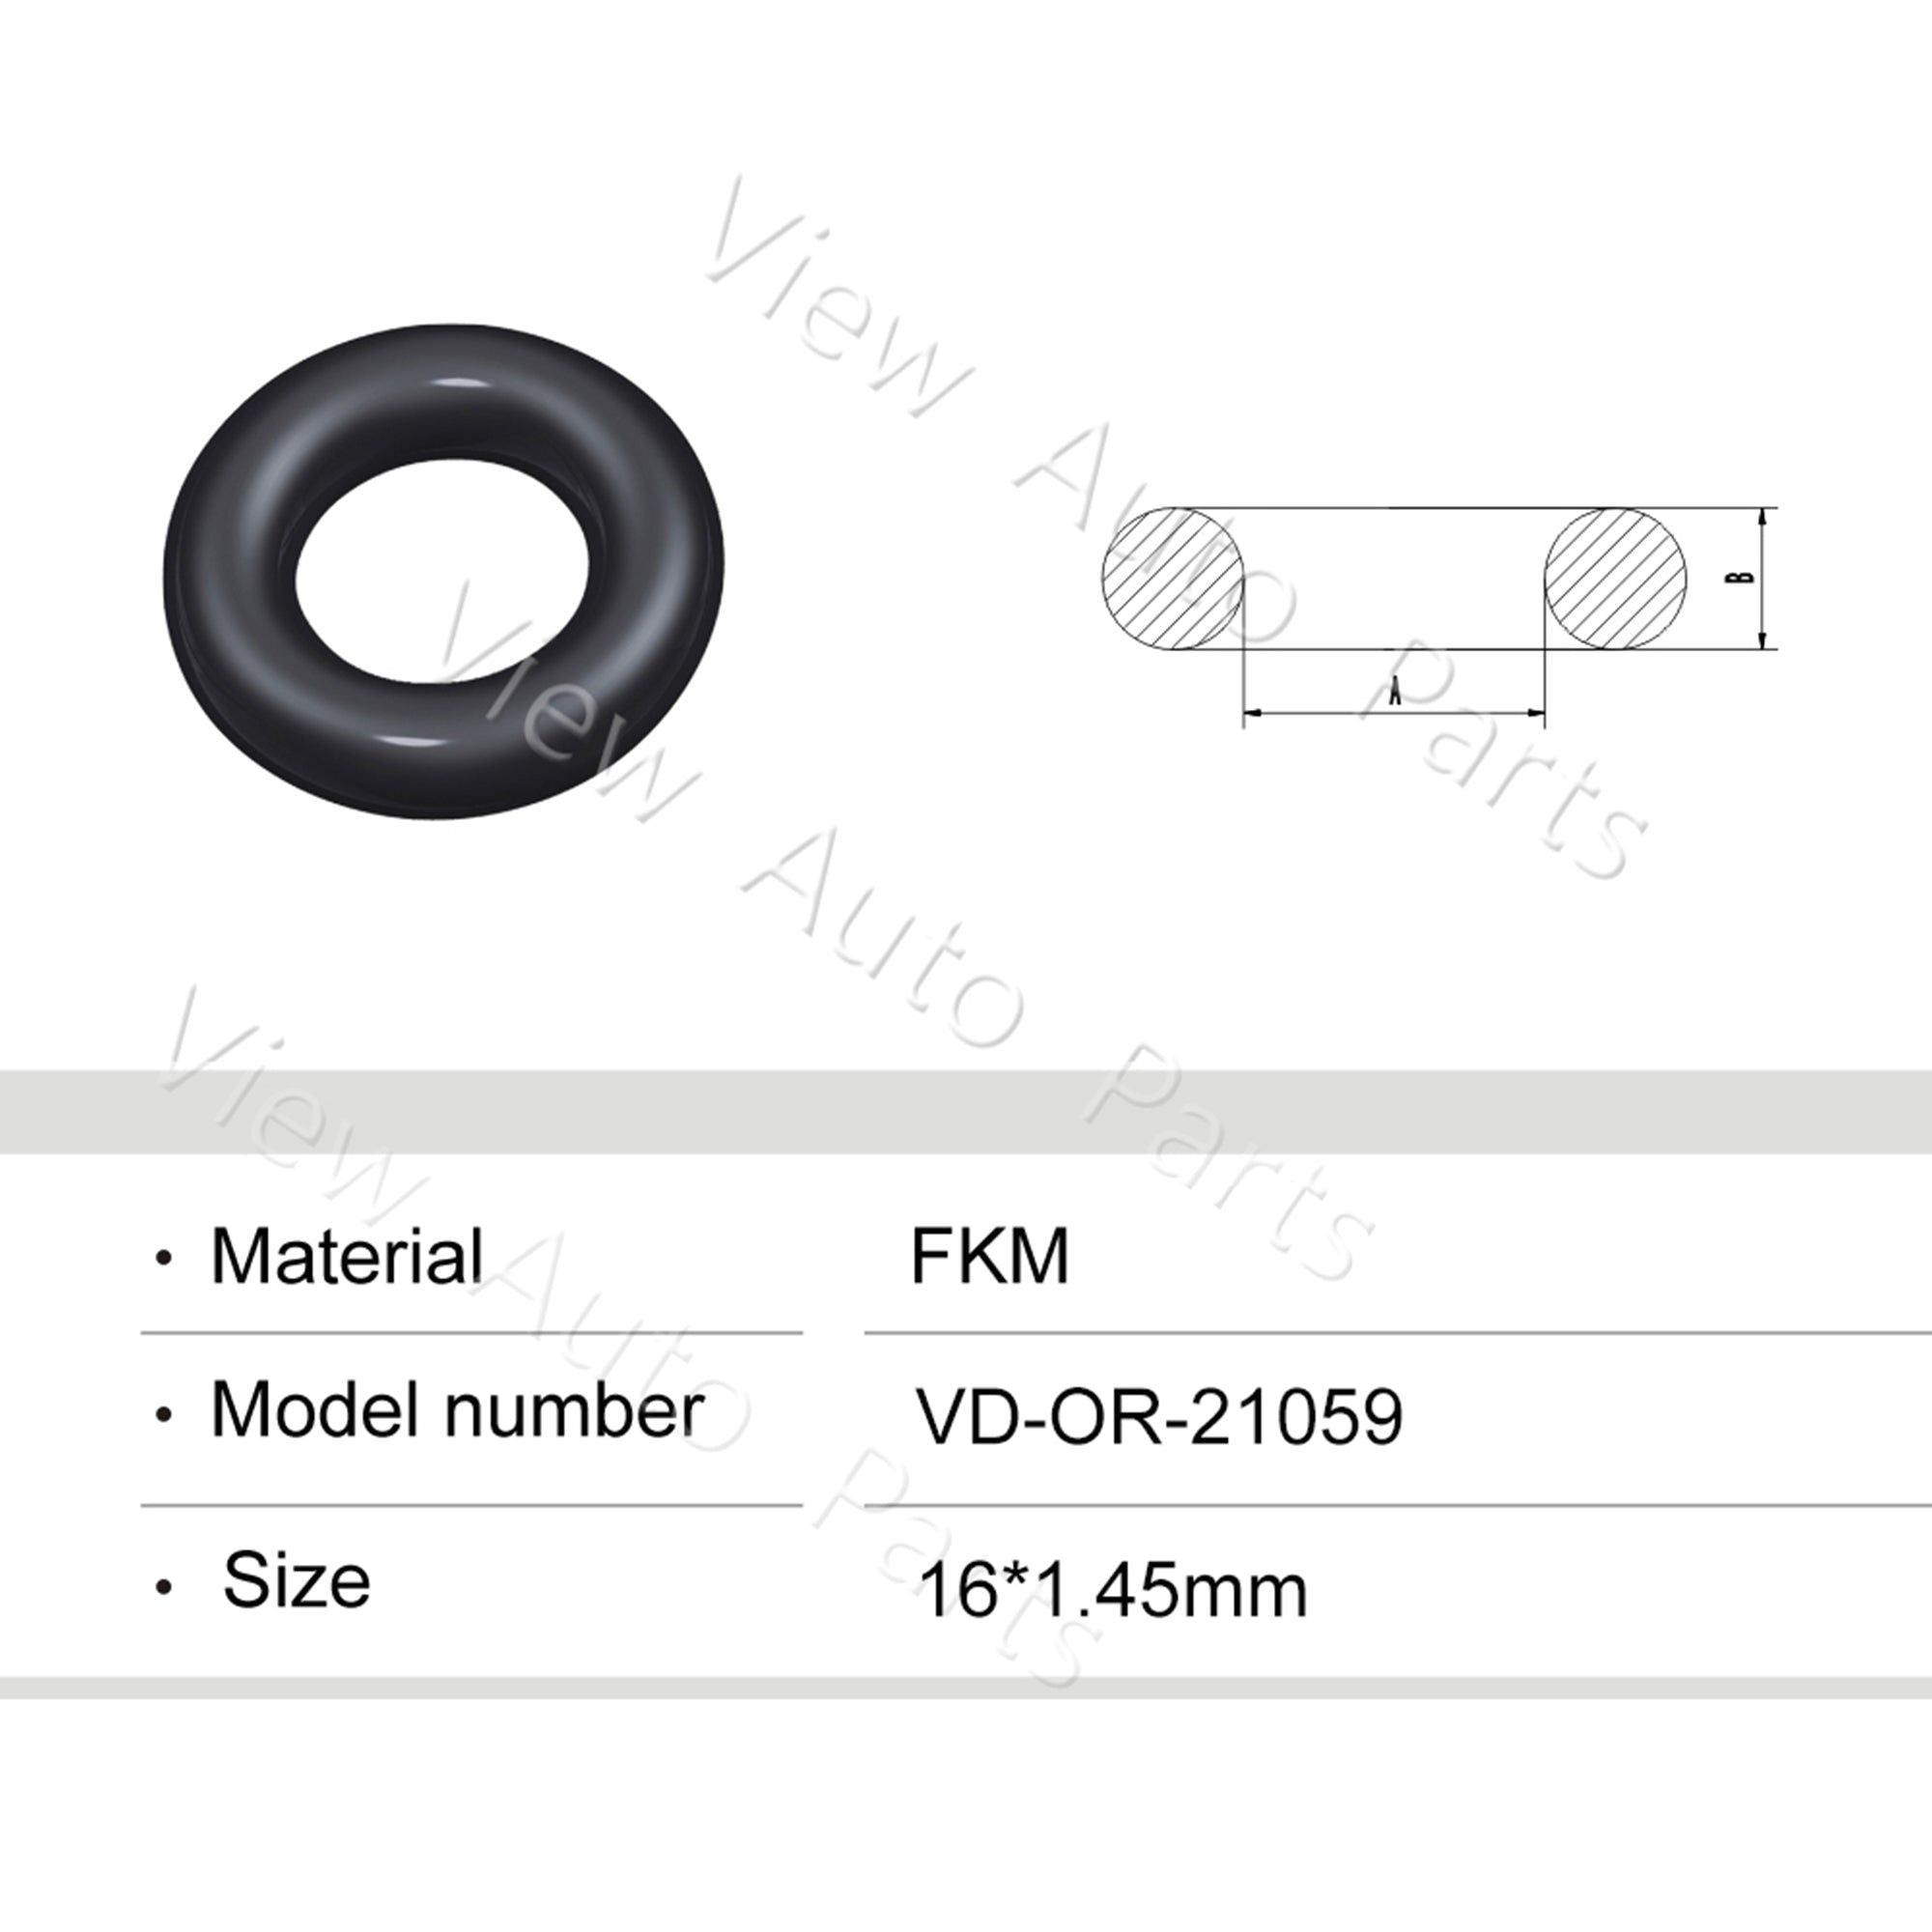 Fuel Injector Rubber Seal Orings for Fuel Injector Repair Kits FKM & Rubber Heat Resistant, Size: 16*1.45mm OR-21059